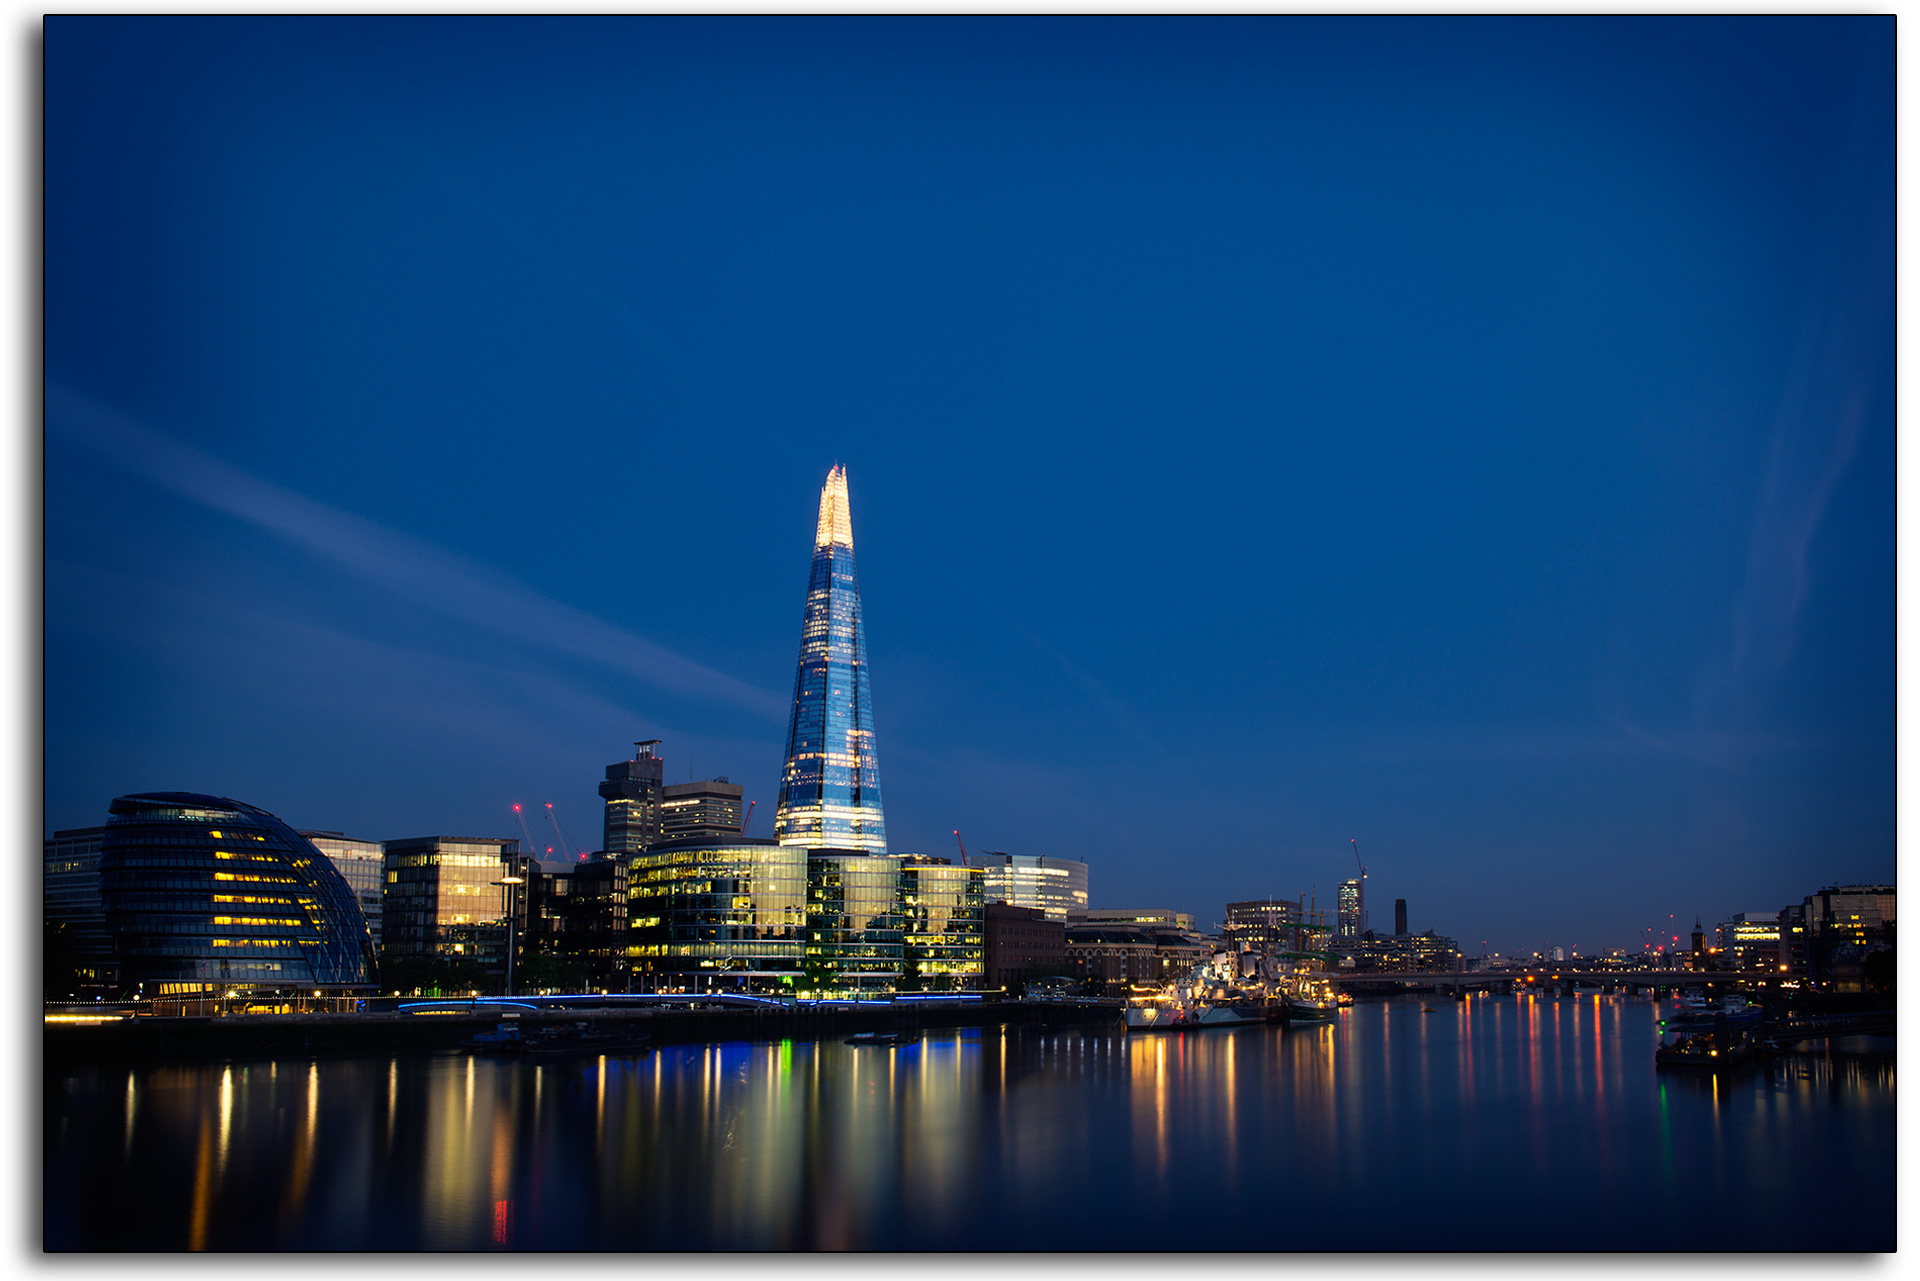 London the shard viewing gallery town hall river thames long exposure lee ramsden professional photographer www.leeramsden.com blue sky illuminations hotel office building.jpg